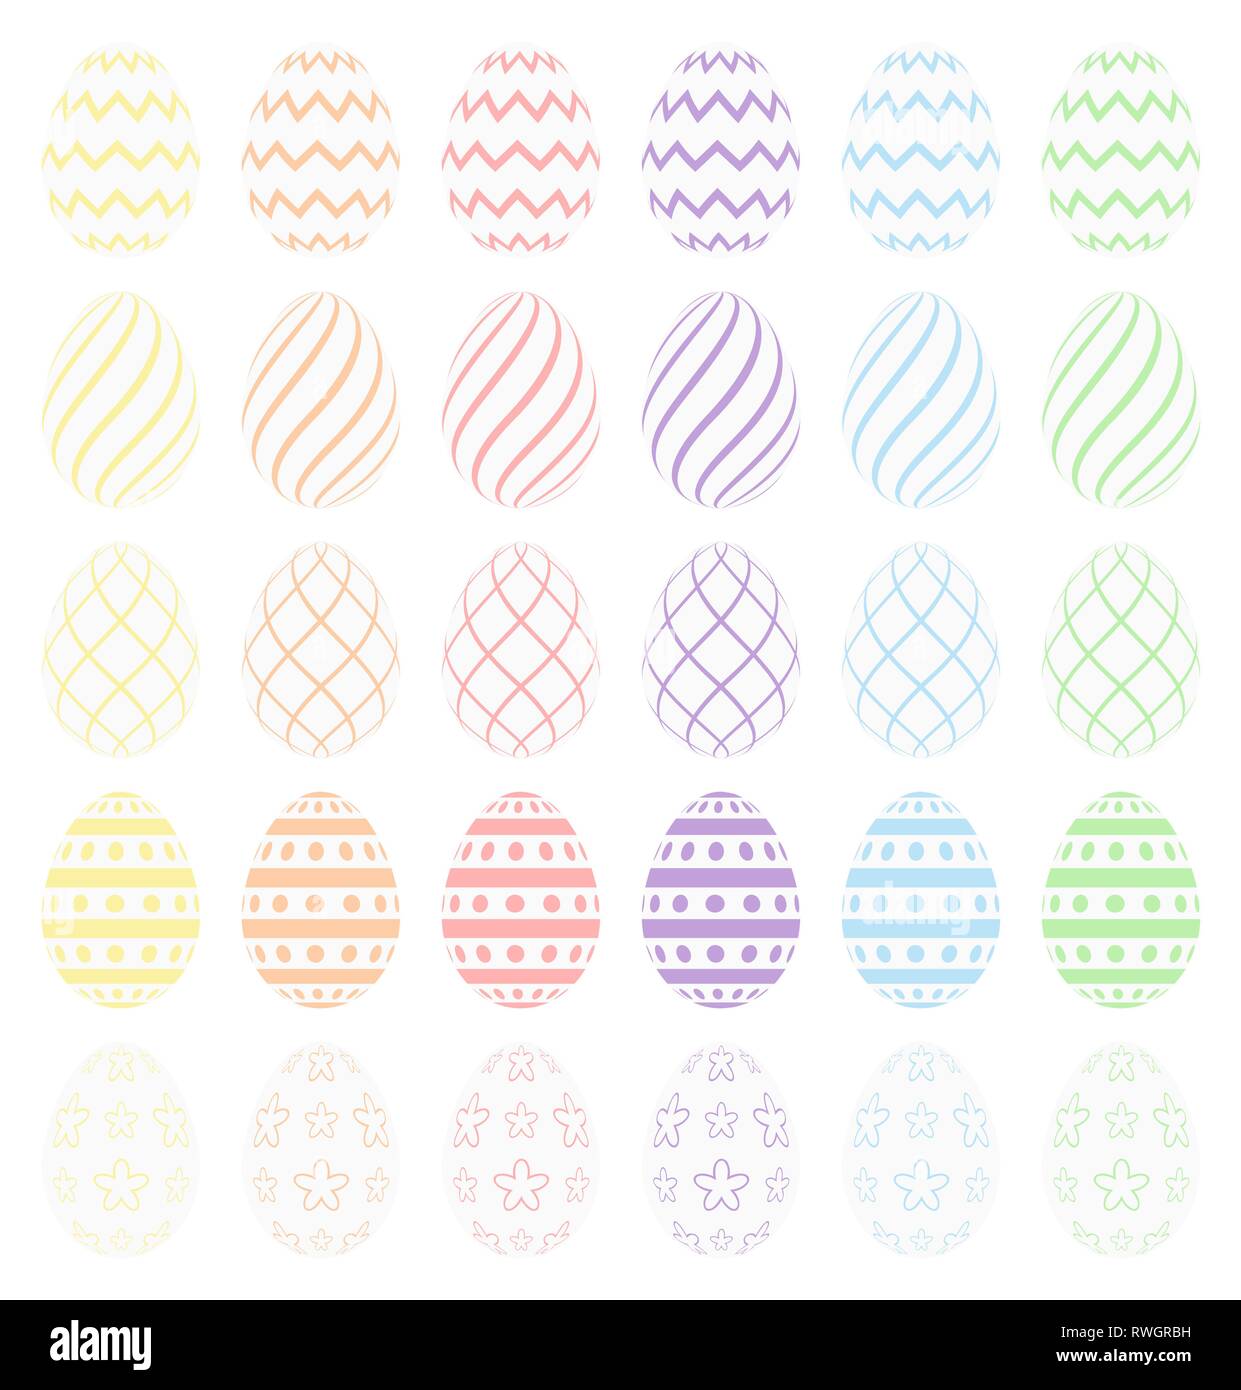 Set of white Easter eggs with various pastel colorful patterns. High quality vector. Stock Vector